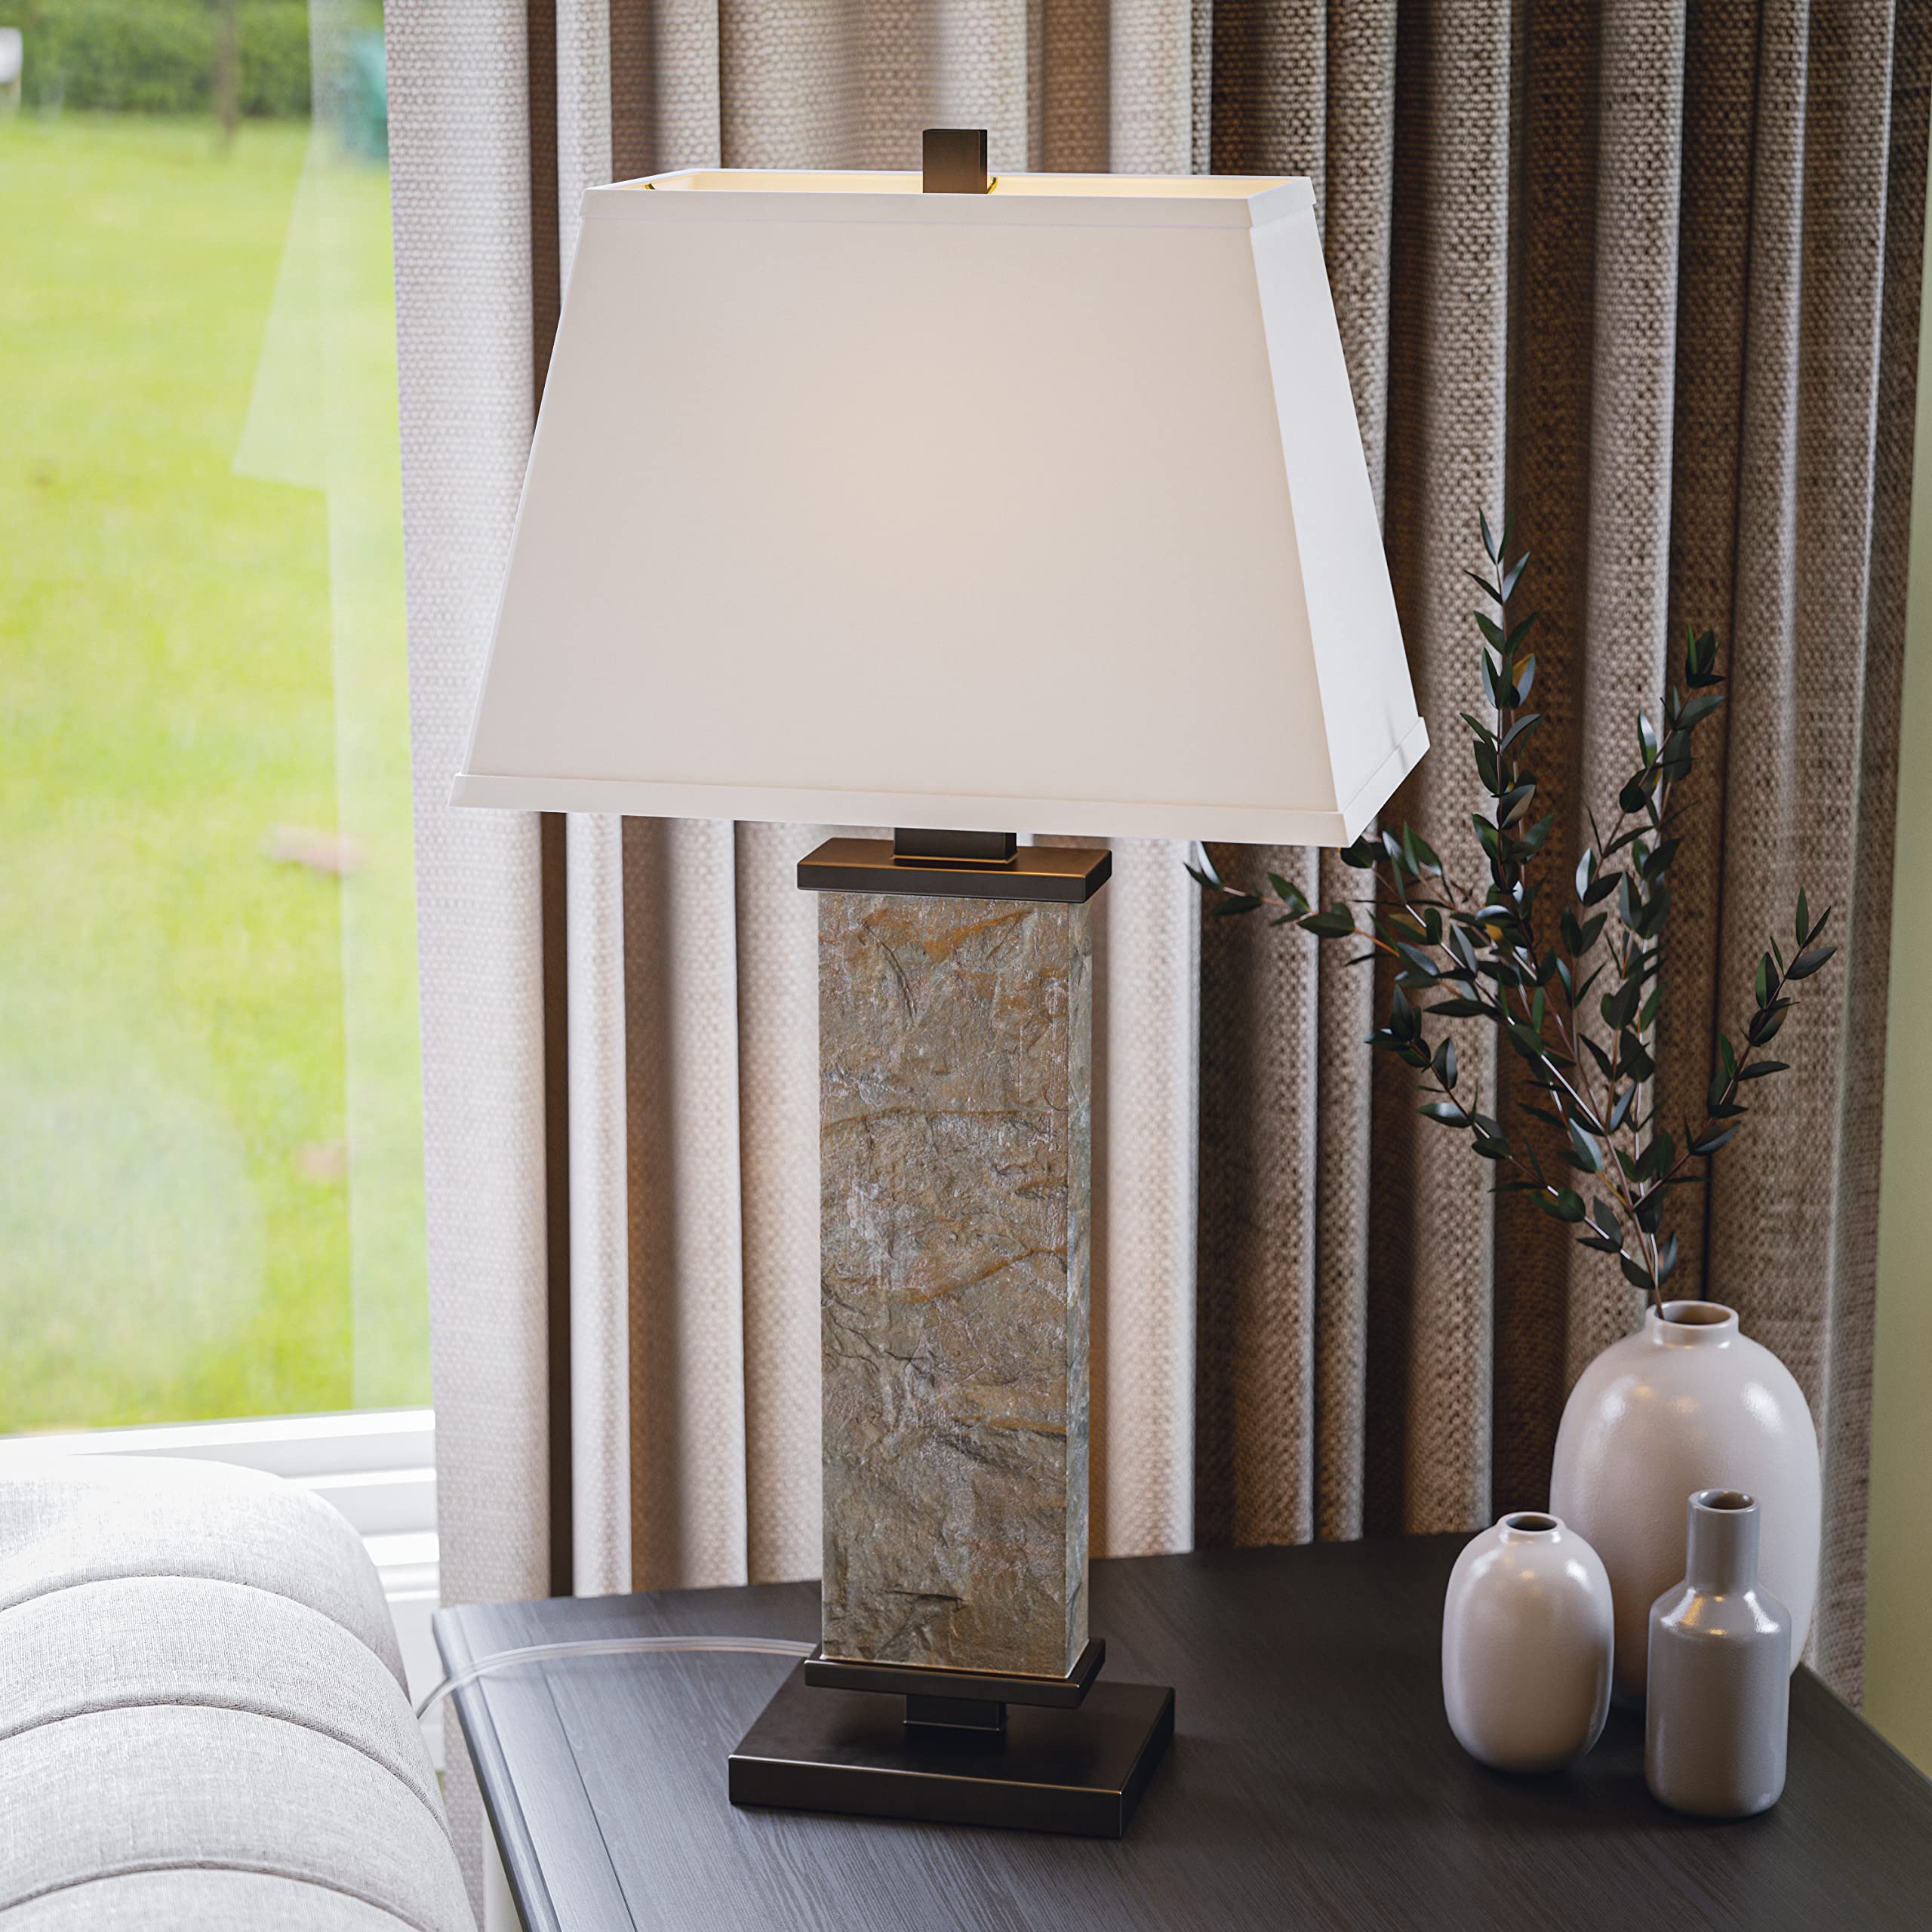 Kenroy Home 21037SL Hanover Table Lamps, 29 Inch Height, 15 Inch Width, 9.5 Inch Depth, Natural Slate